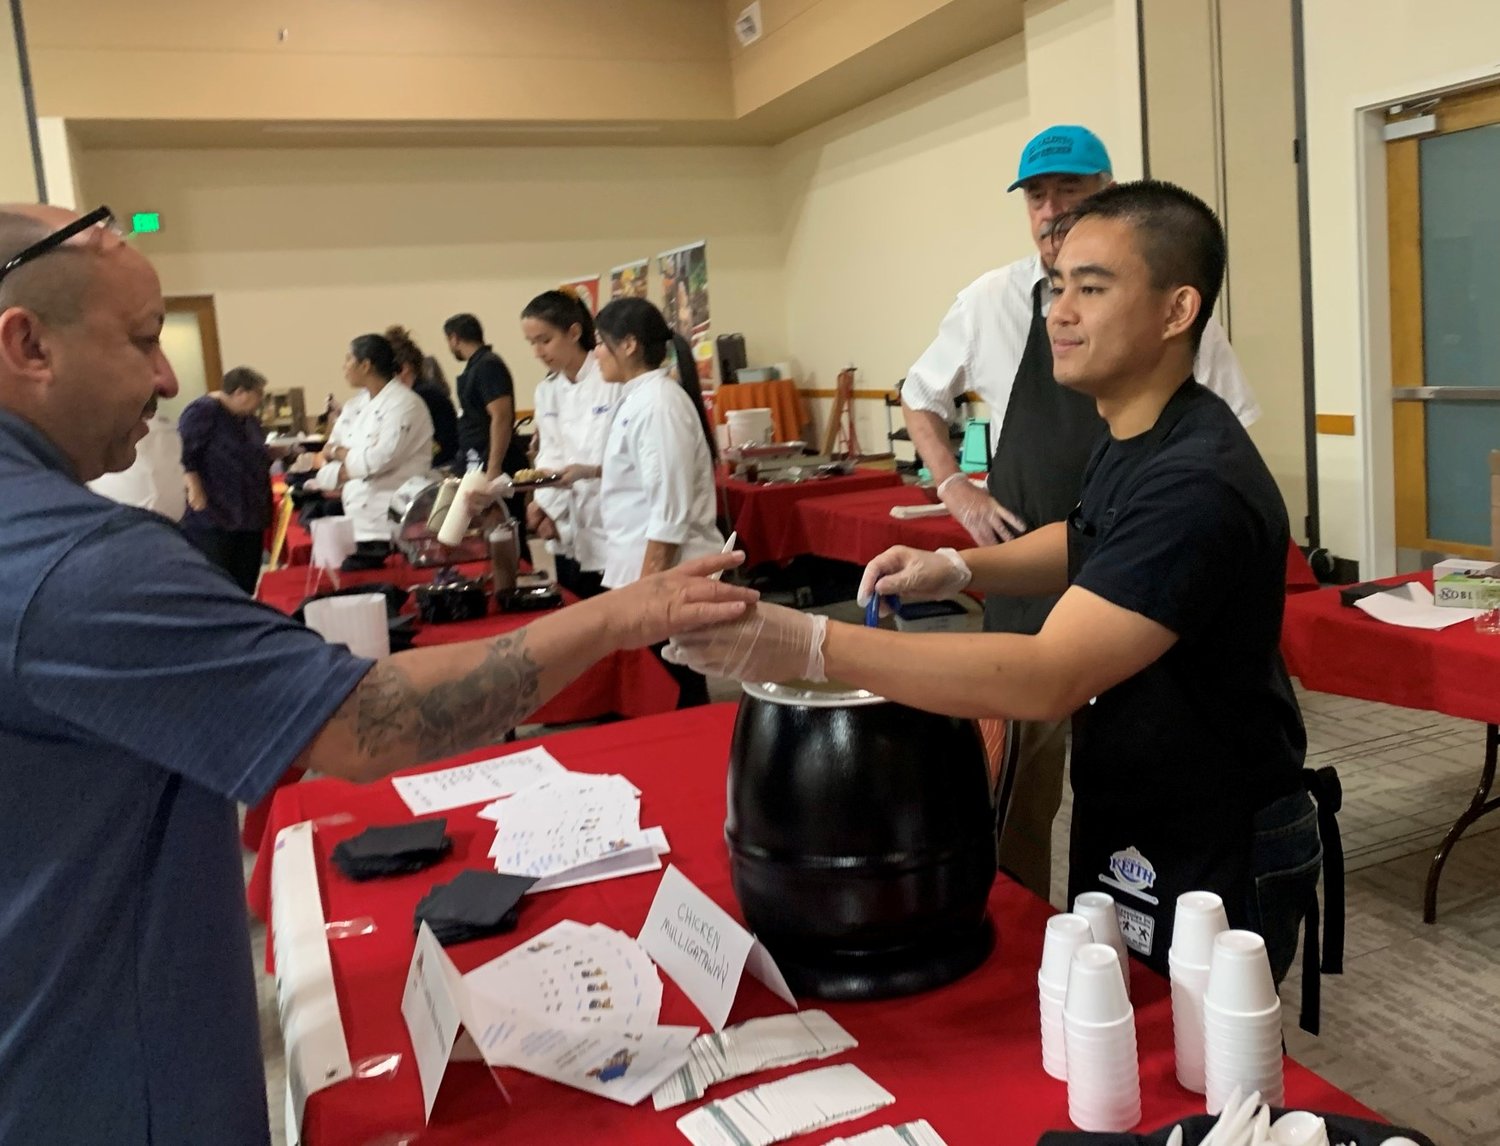 El Caldito Soup kitchen provided chicken mulligatawny soup and, at the next table, the student cooks at Dona Ana Community College created delicious red chile wontons for the Taste of Las Cruces.